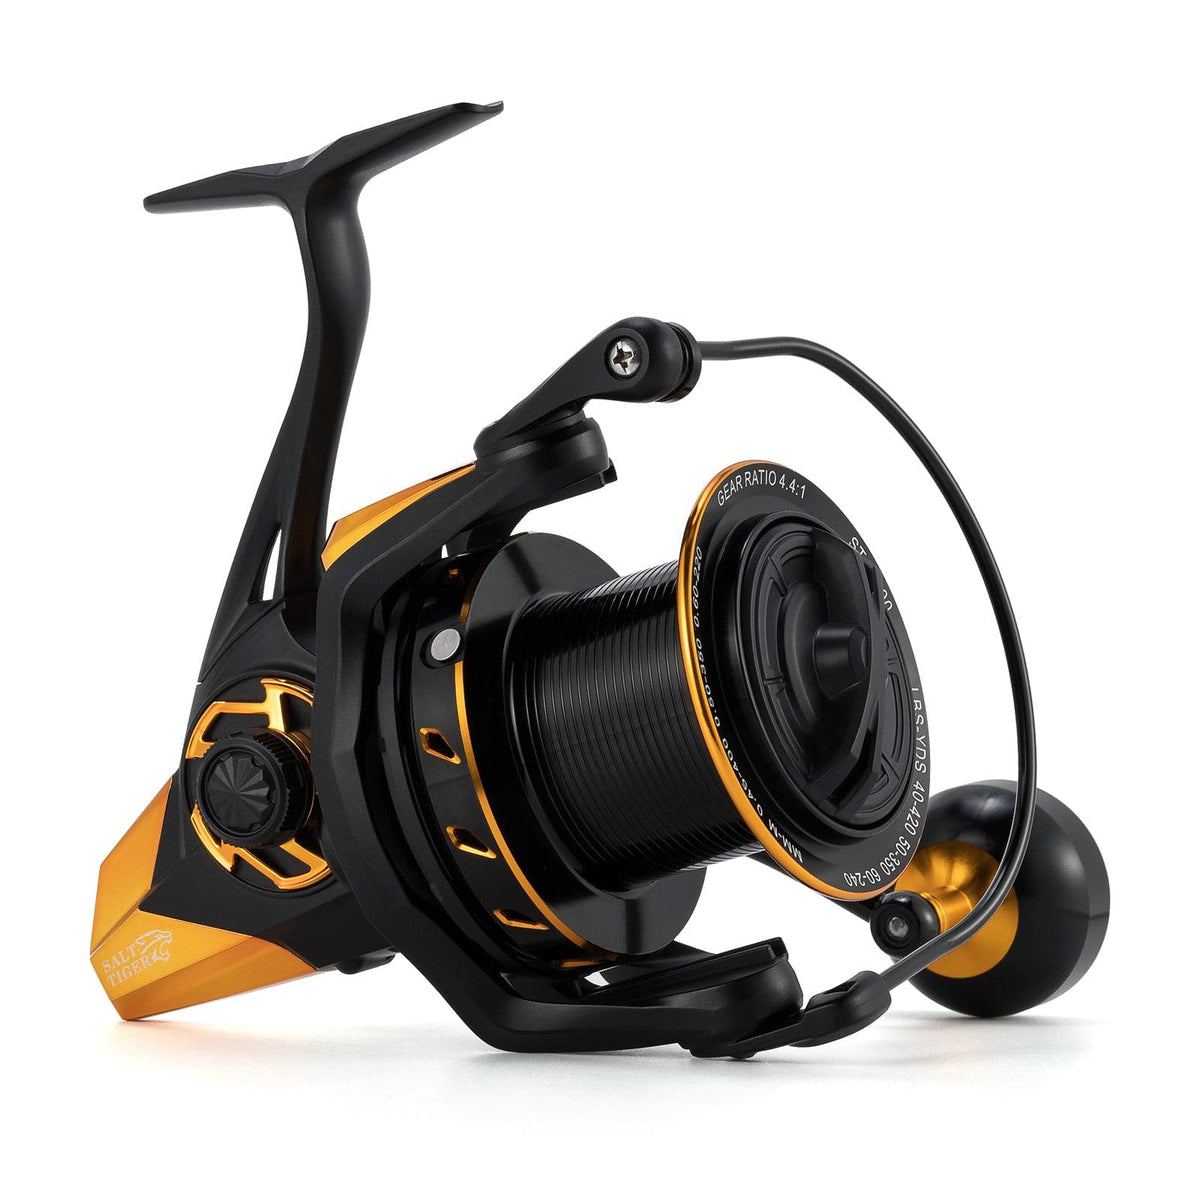 Reel - RR 6000 Big Fish Spin Reel. Smooth strong durable salt